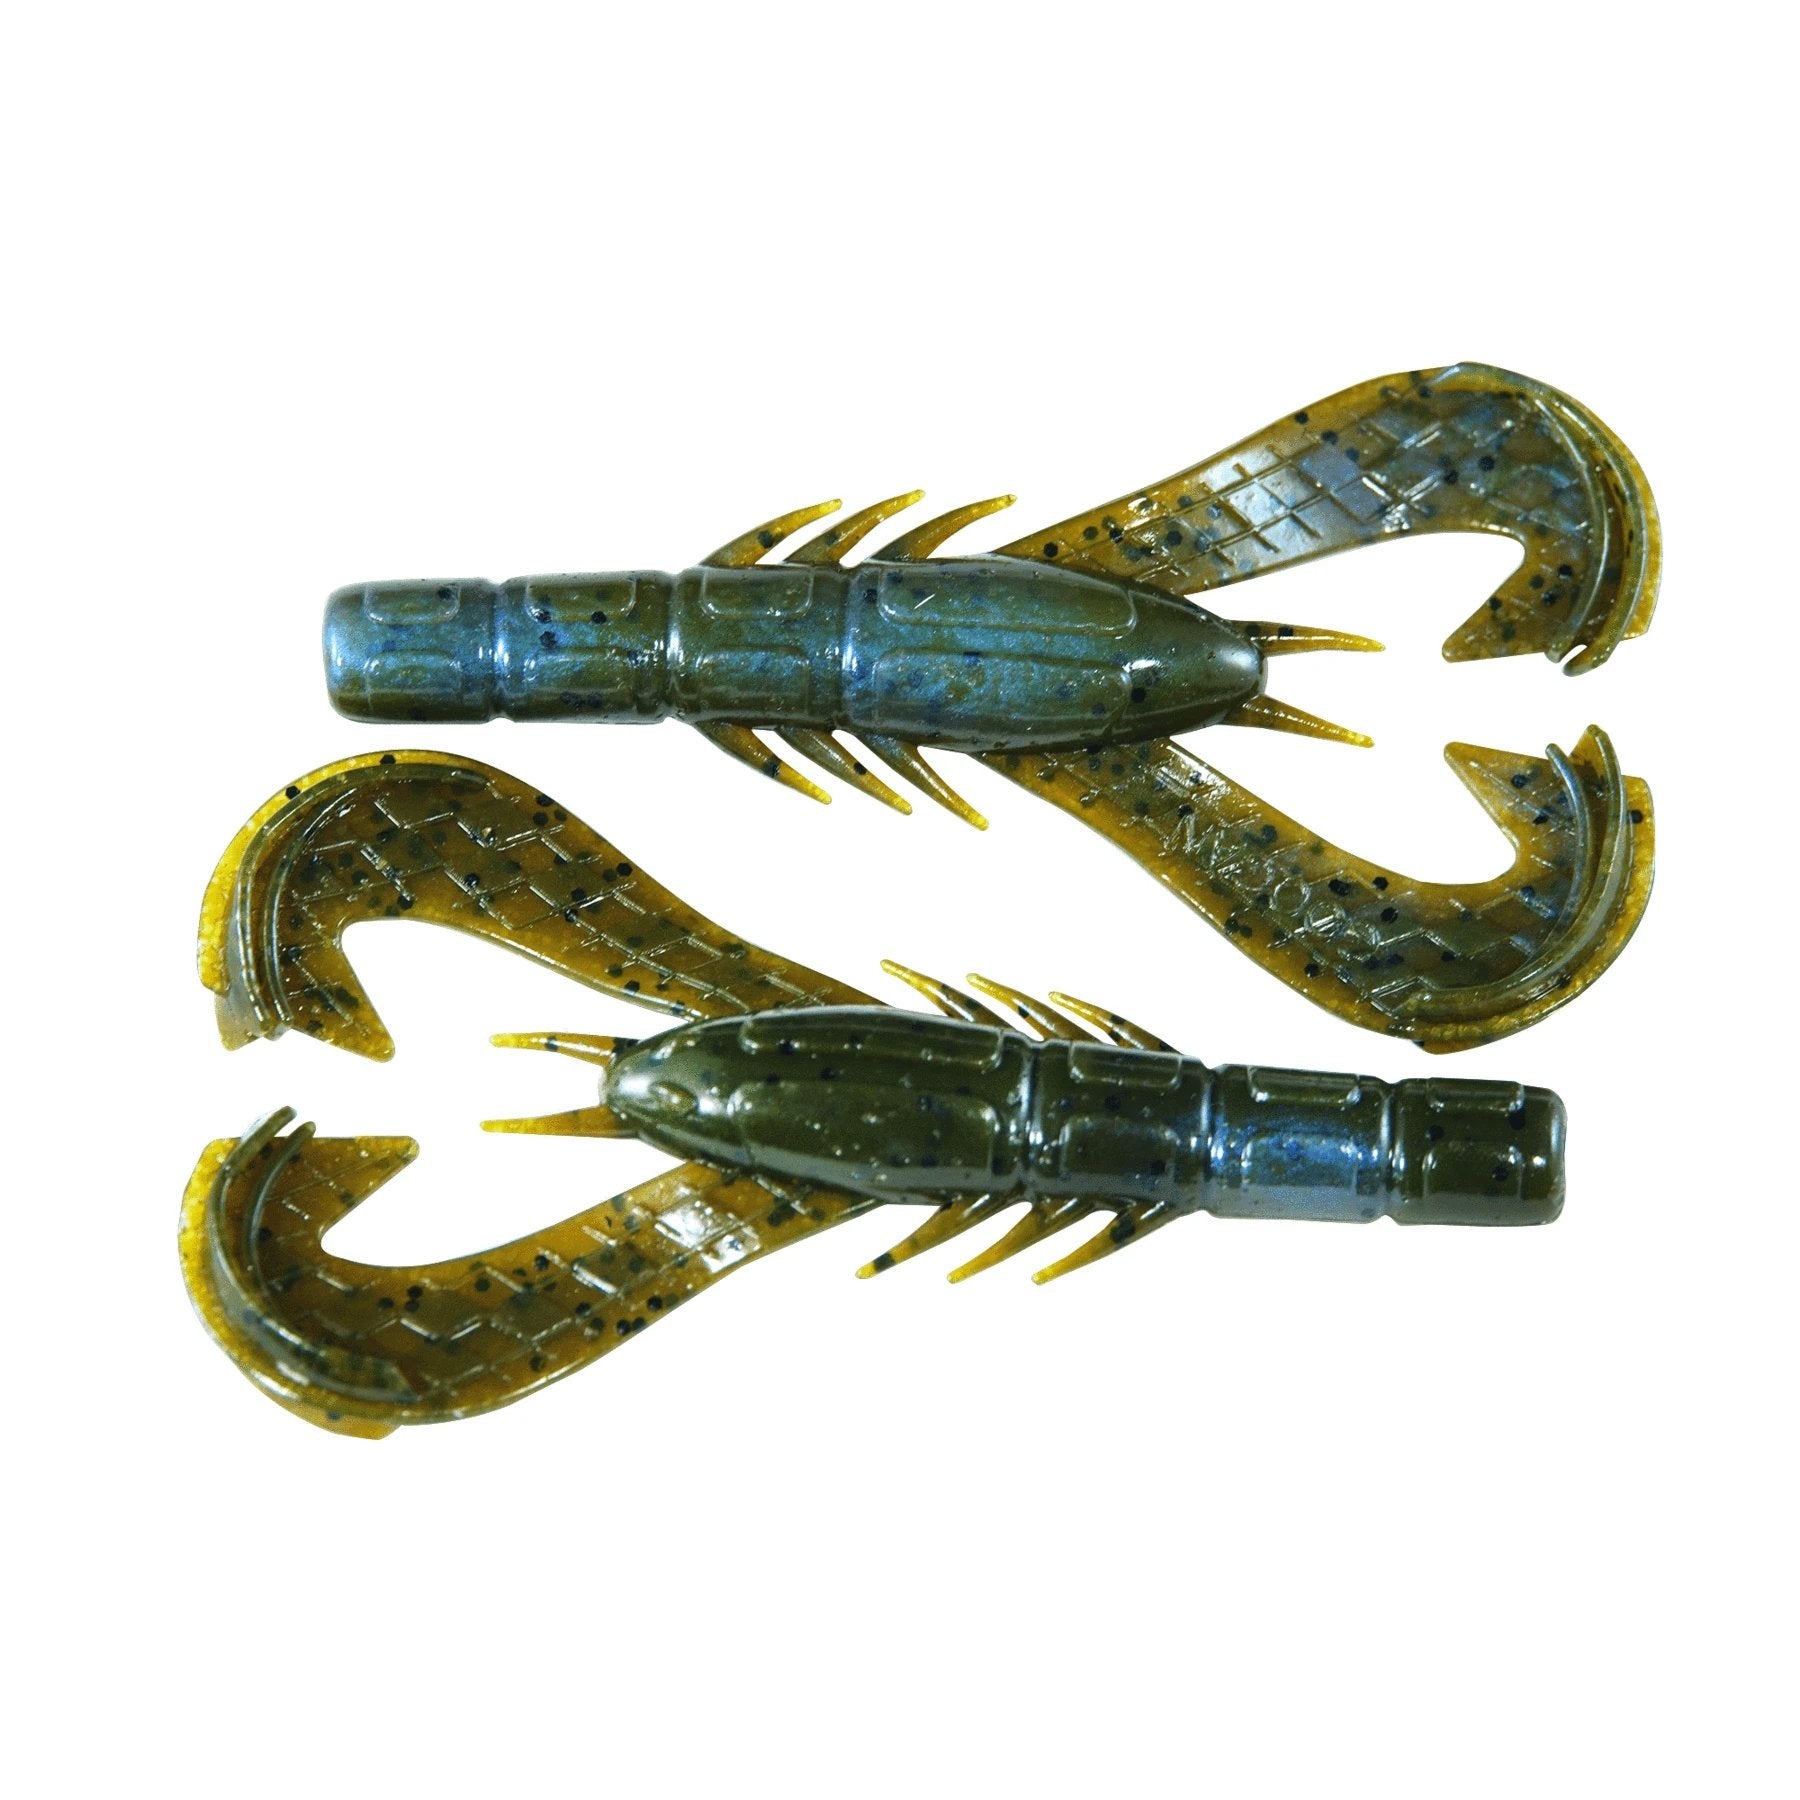 Are Googan Baits Durable and do they Catch Fish? (Krackin' Craw) 